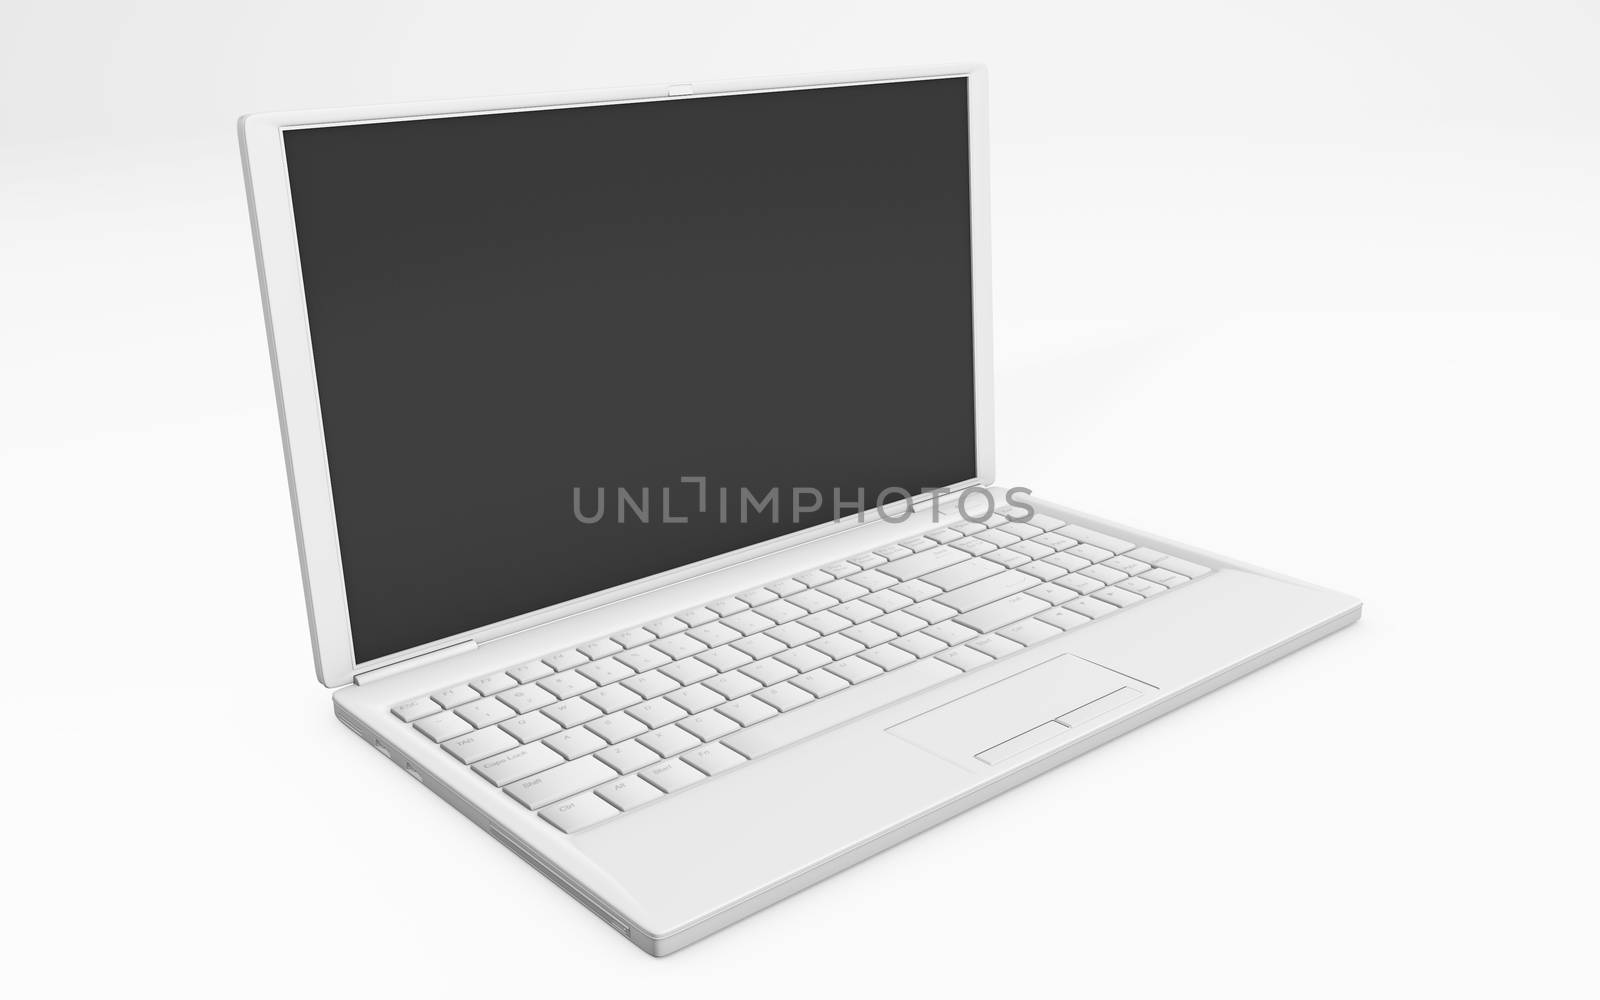 3d rendering of a laptop white colored isolated on white background